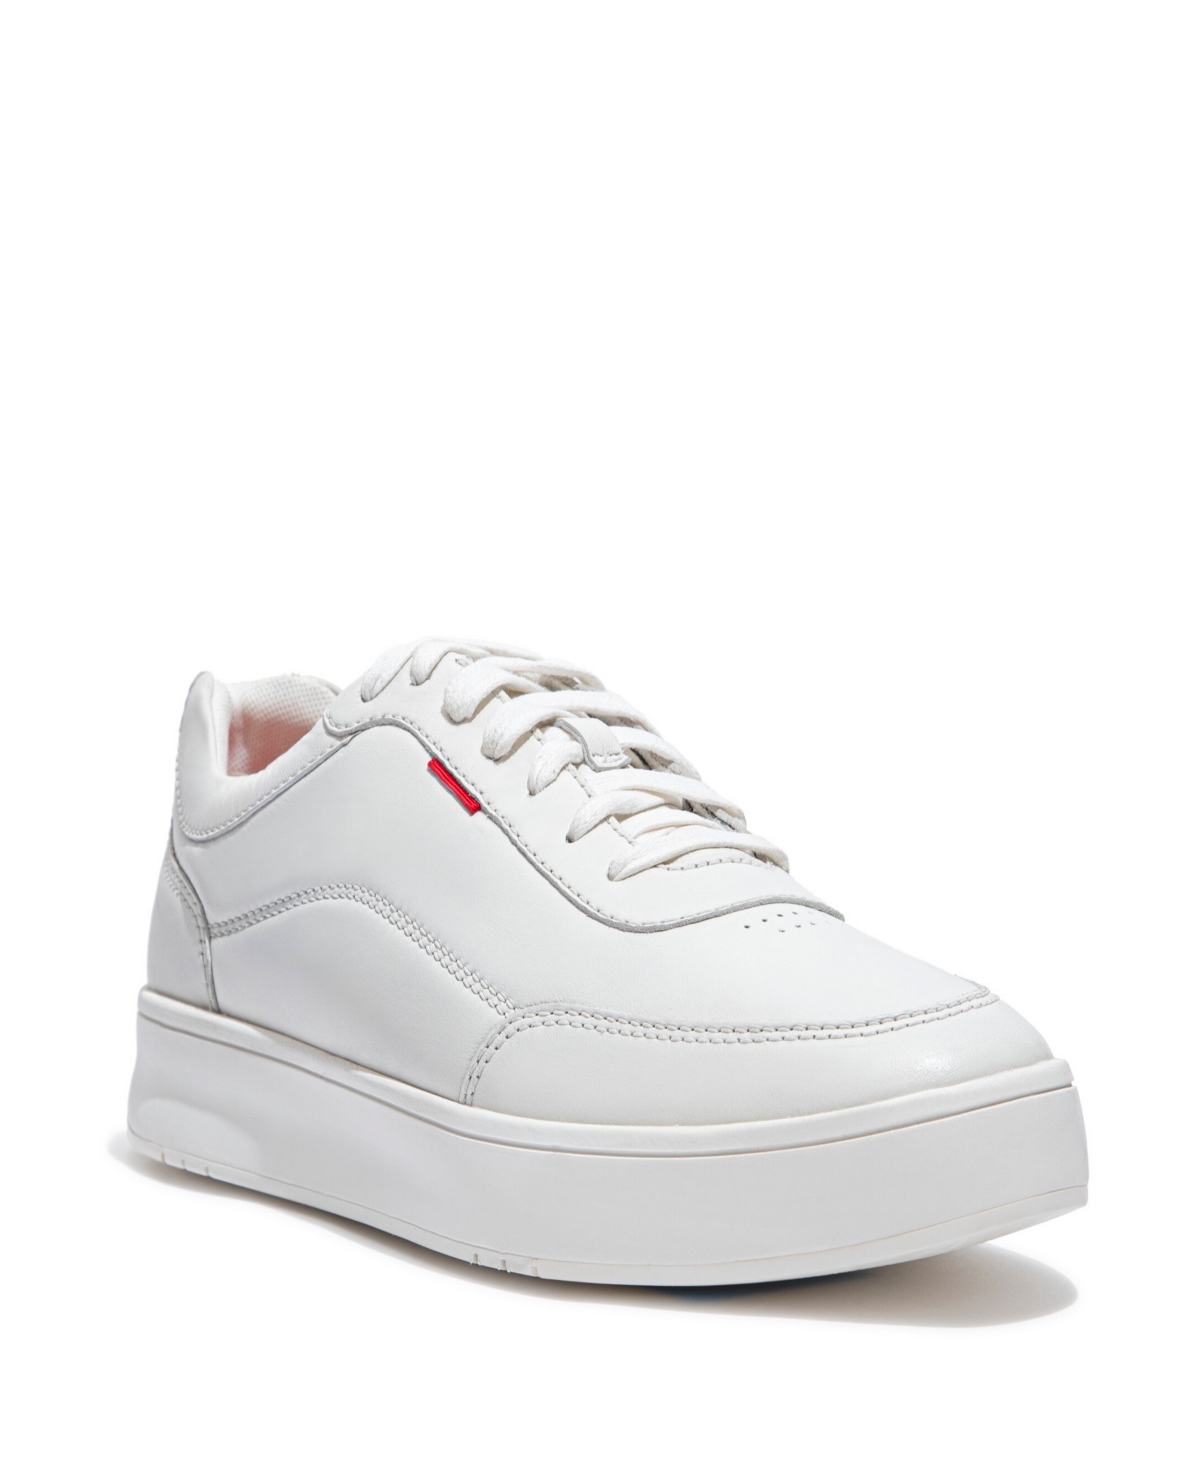 Men's Rally x Leather Sneakers - White